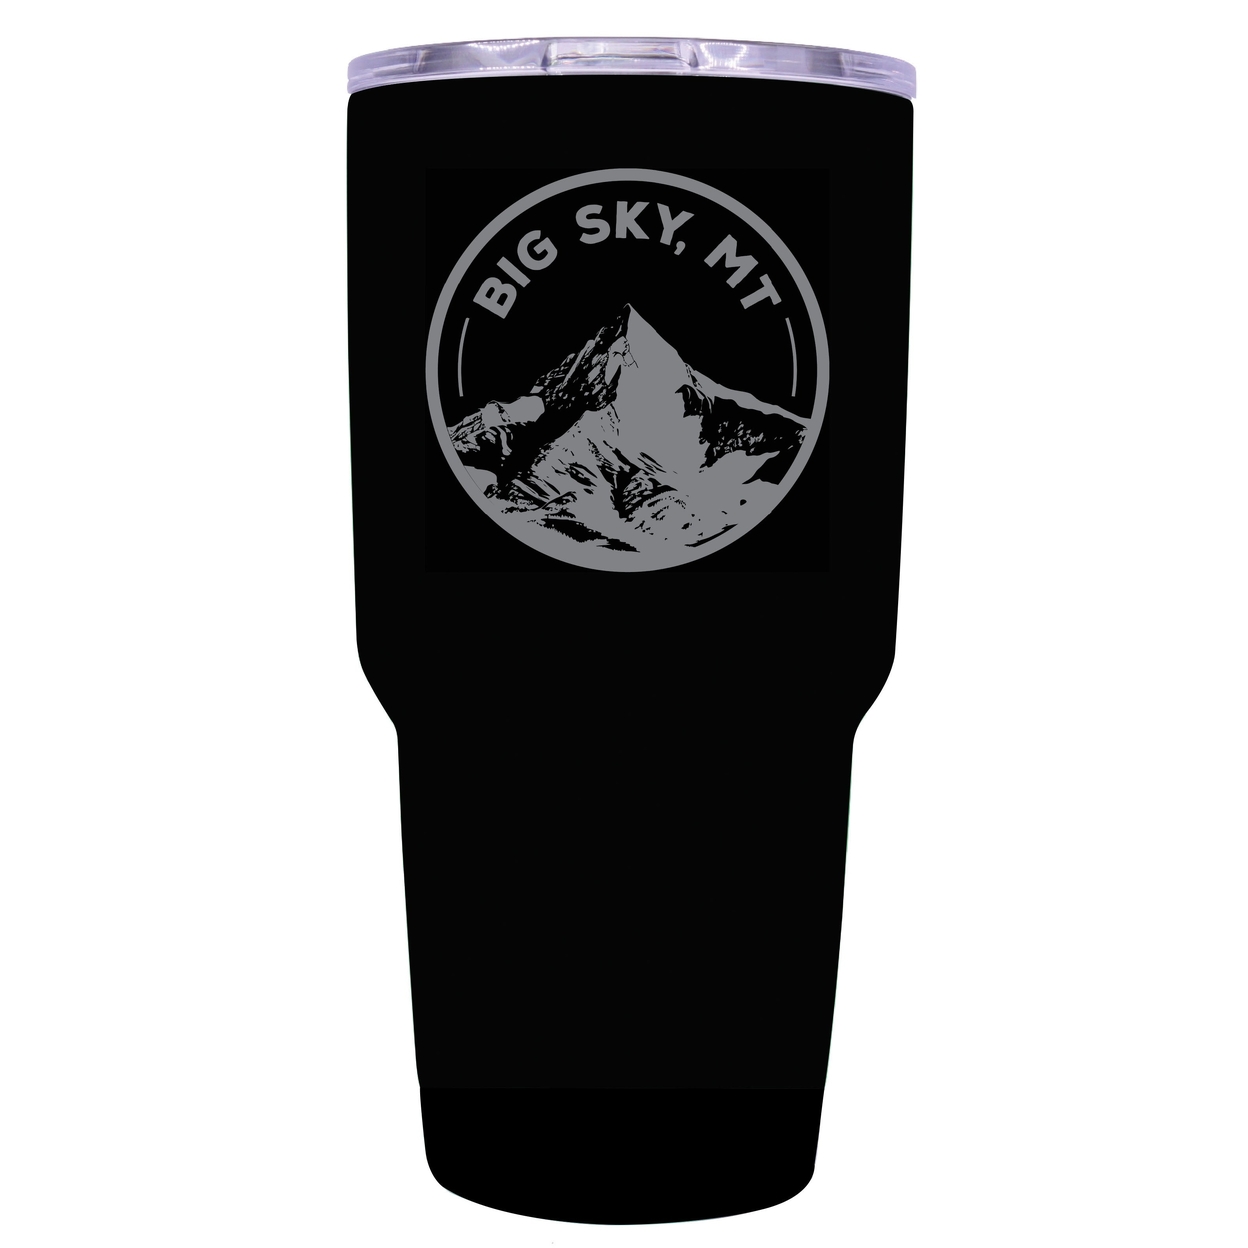 Big Sky Montana Souvenir 24 Oz Engraved Insulated Stainless Steel Tumbler - Black,,2-Pack